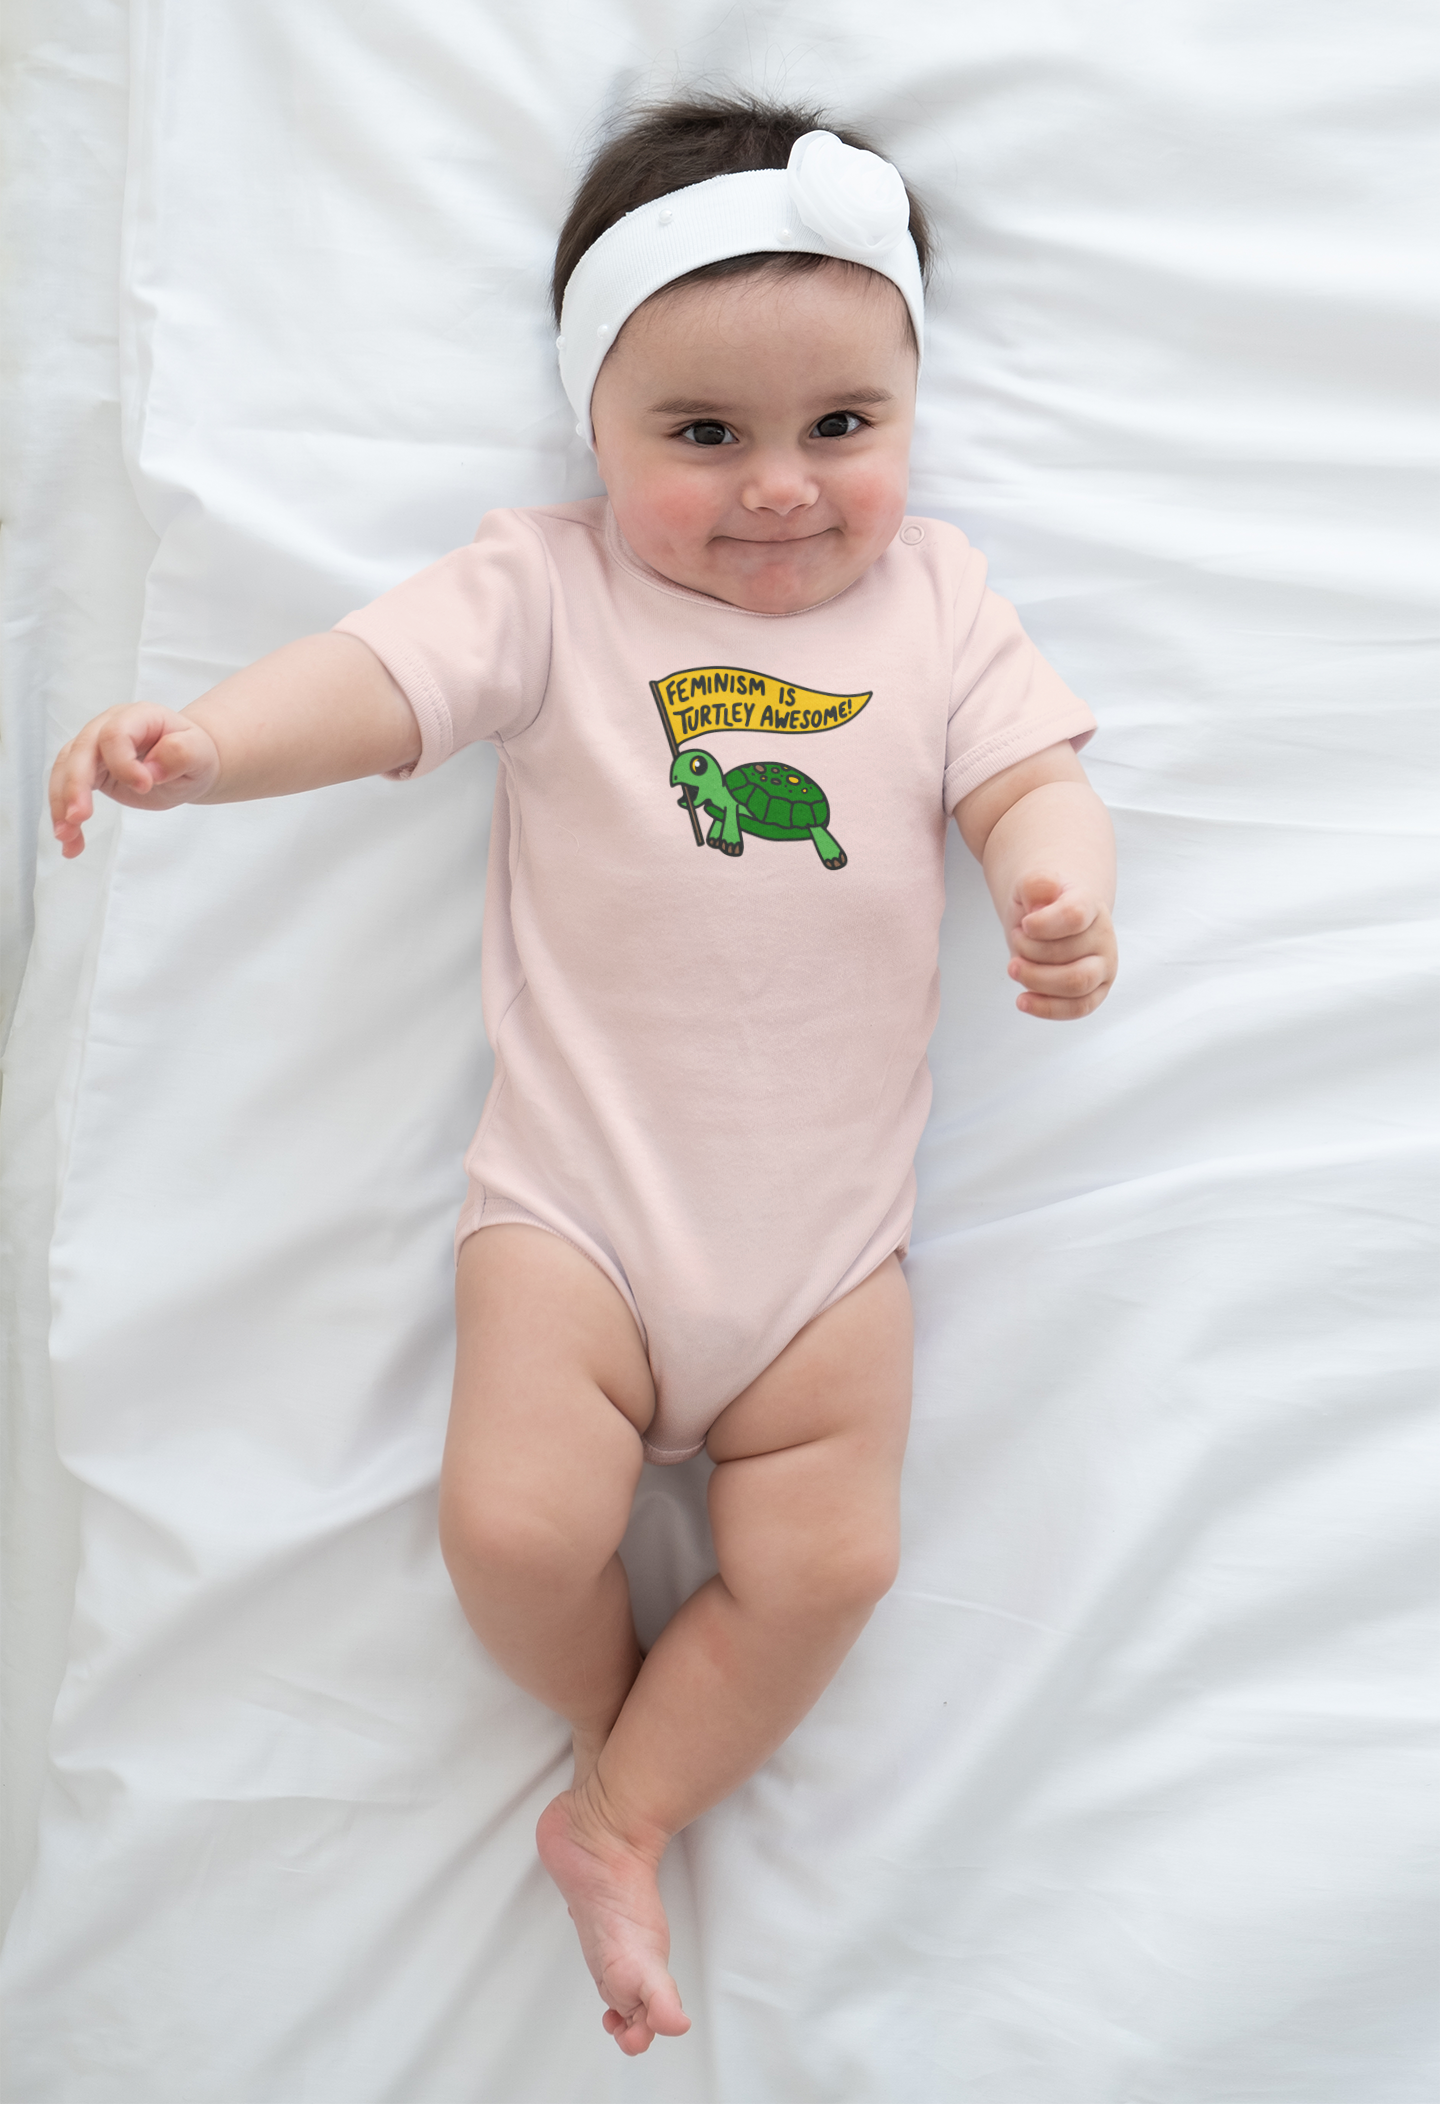 baby with headband wearing peach shirt with "Feminism is Turtley Awesome" onesie